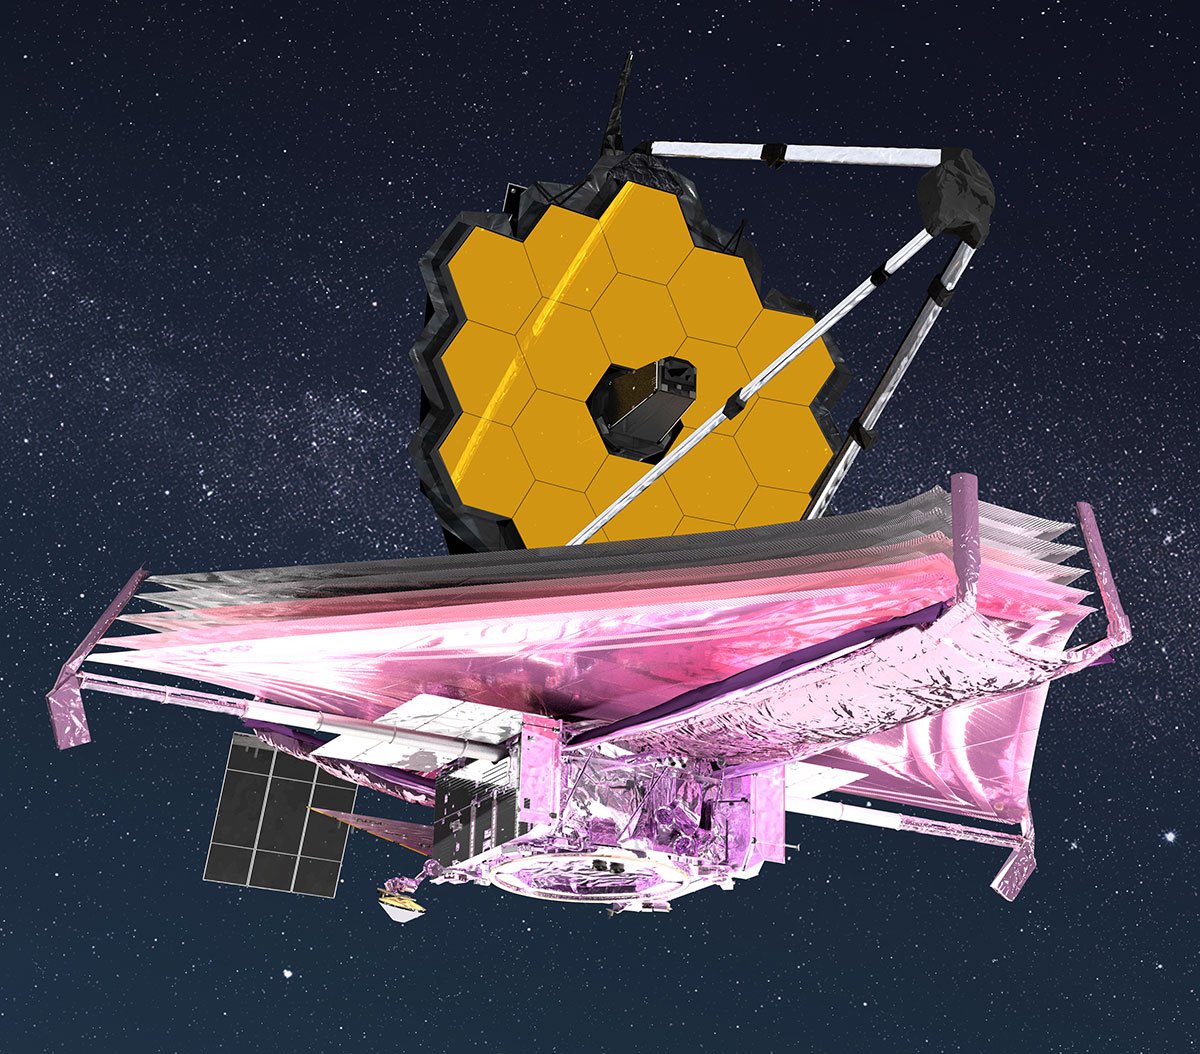 Illustration of a large, flat base with a giant yellow-tiled satellite dish on top of it, floating in space.